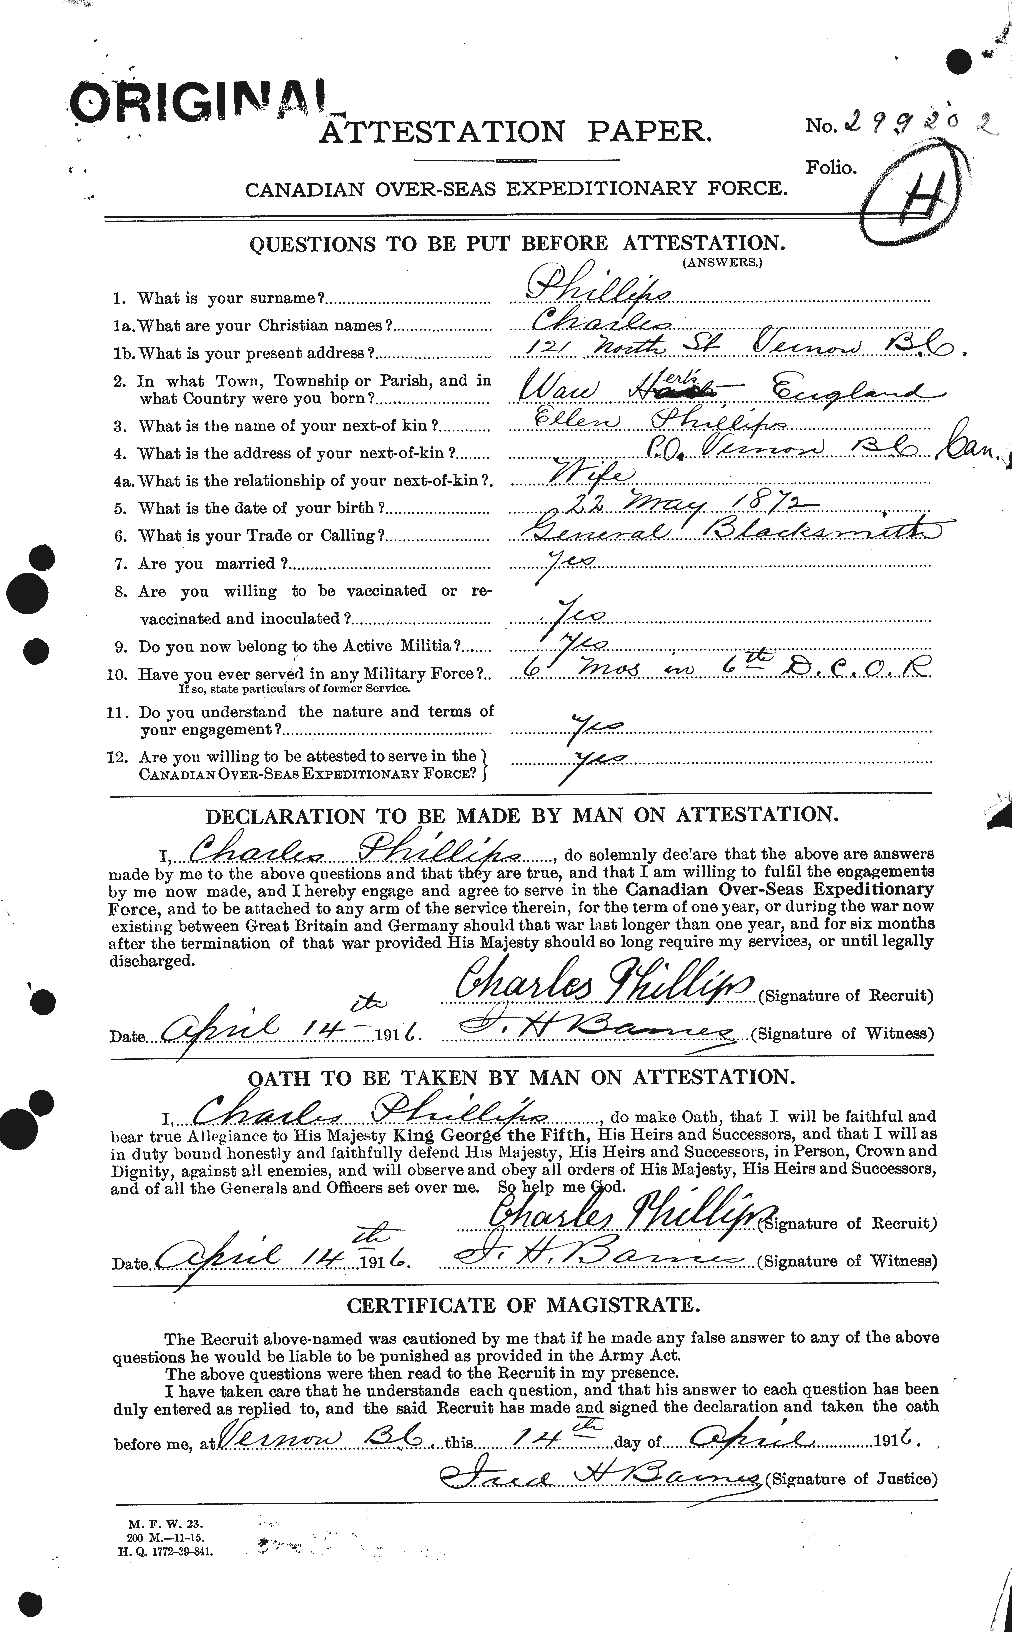 Personnel Records of the First World War - CEF 577326a